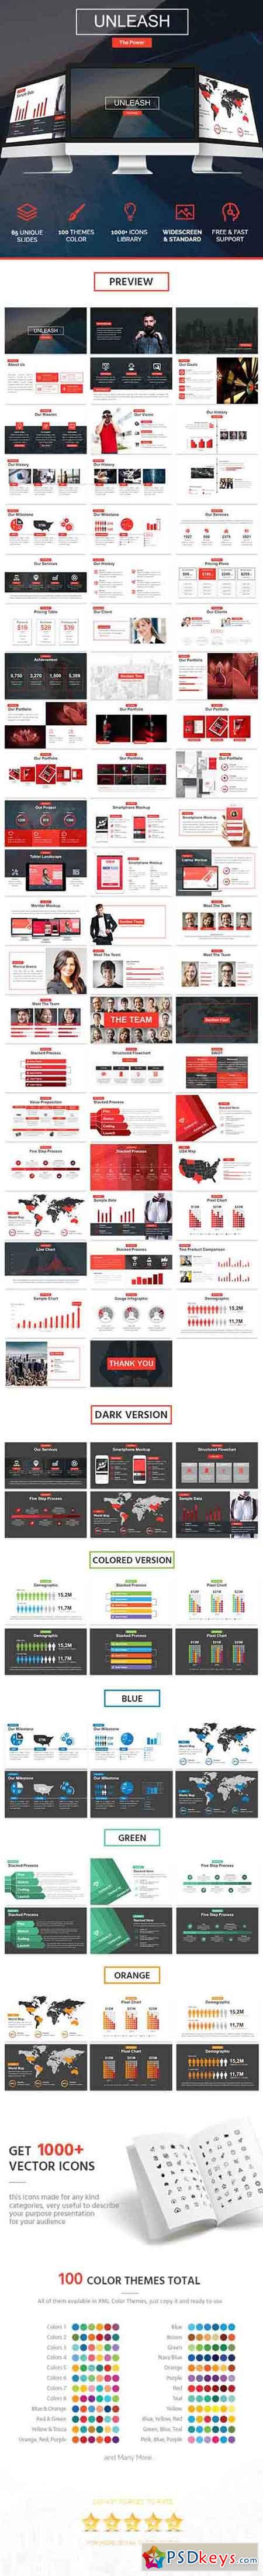 Unleash Powerpoint Template - Relase the Power! 17564307